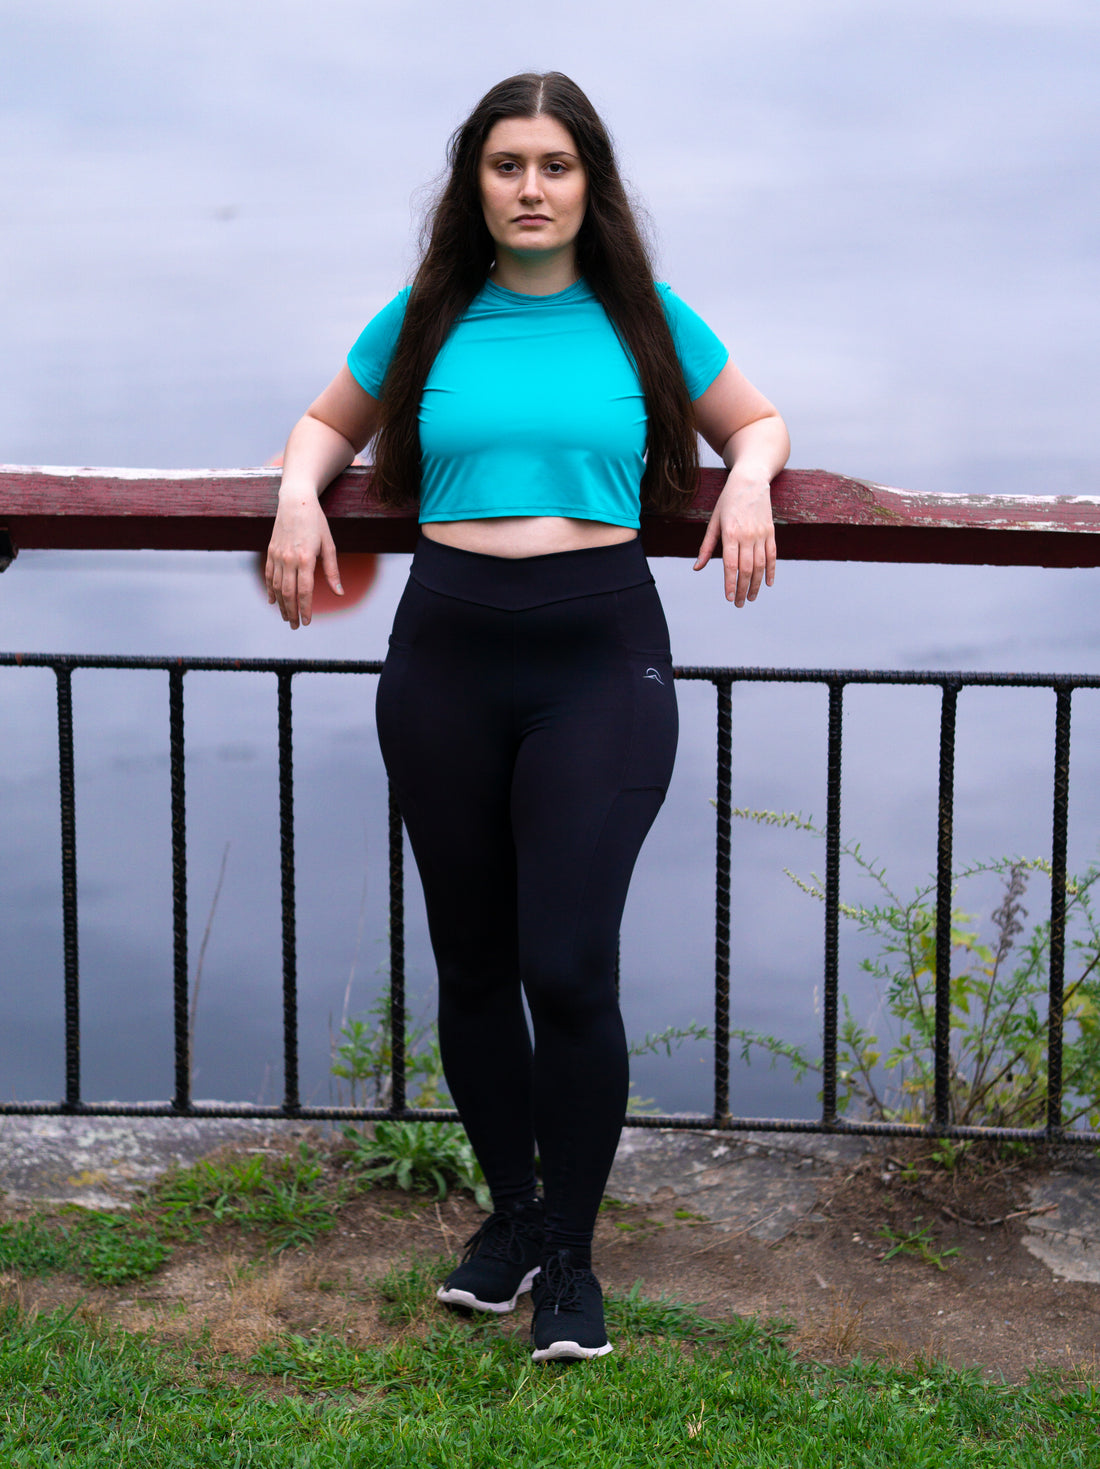 Woman in leggings with pockets and crop top leaning against fence